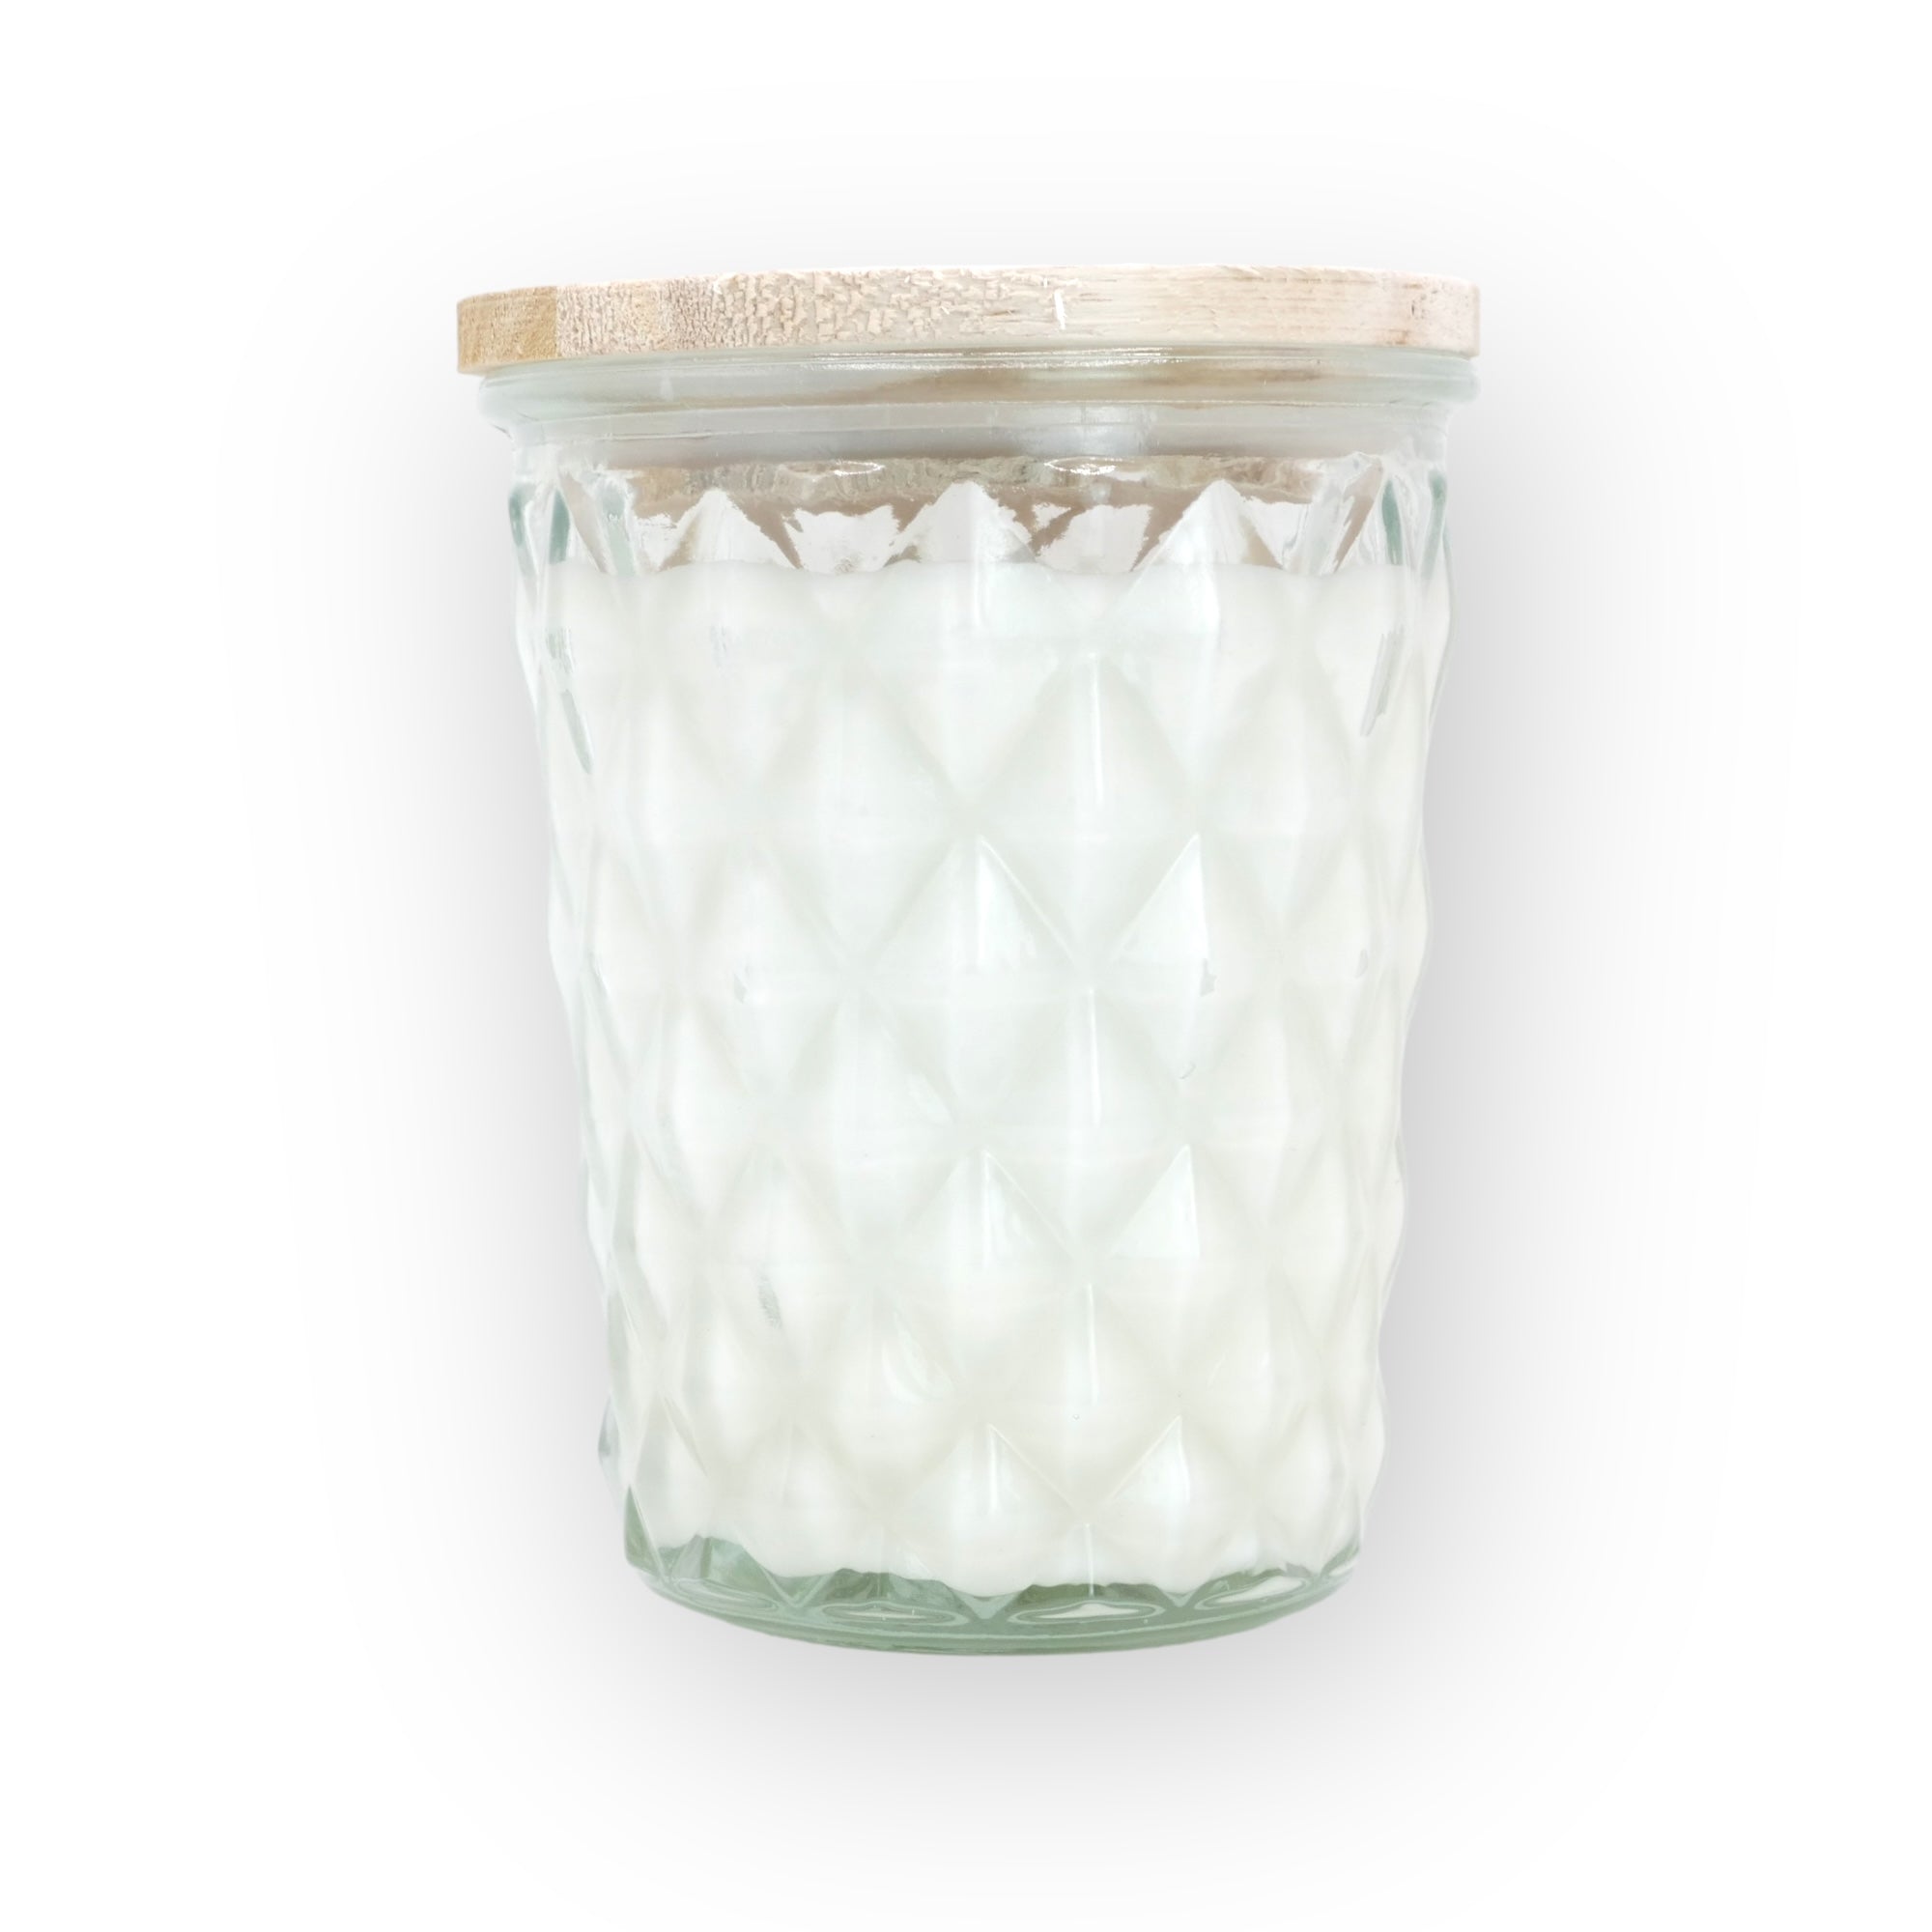 Swan Creek Candle - Whipped Almond Frosting